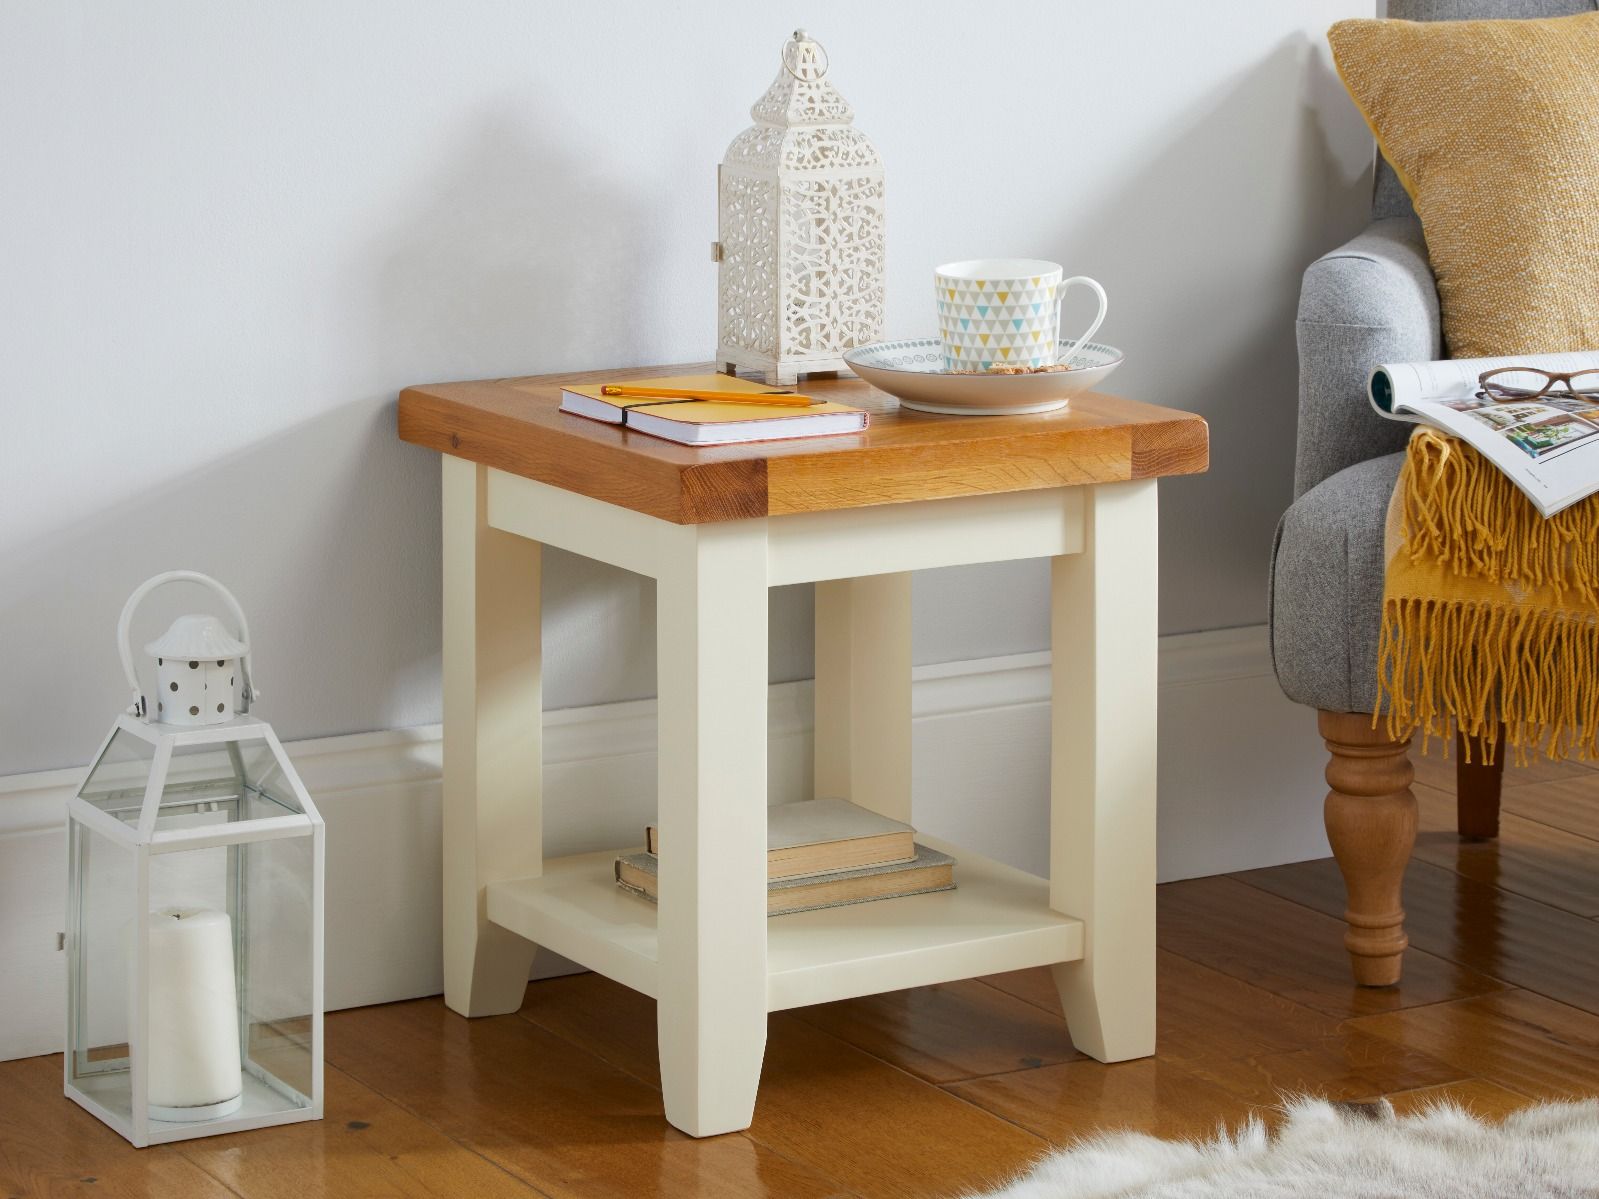 Country Cottage Cream Painted Oak Lamp Table With Shelf - 10% OFF CODE SAVE